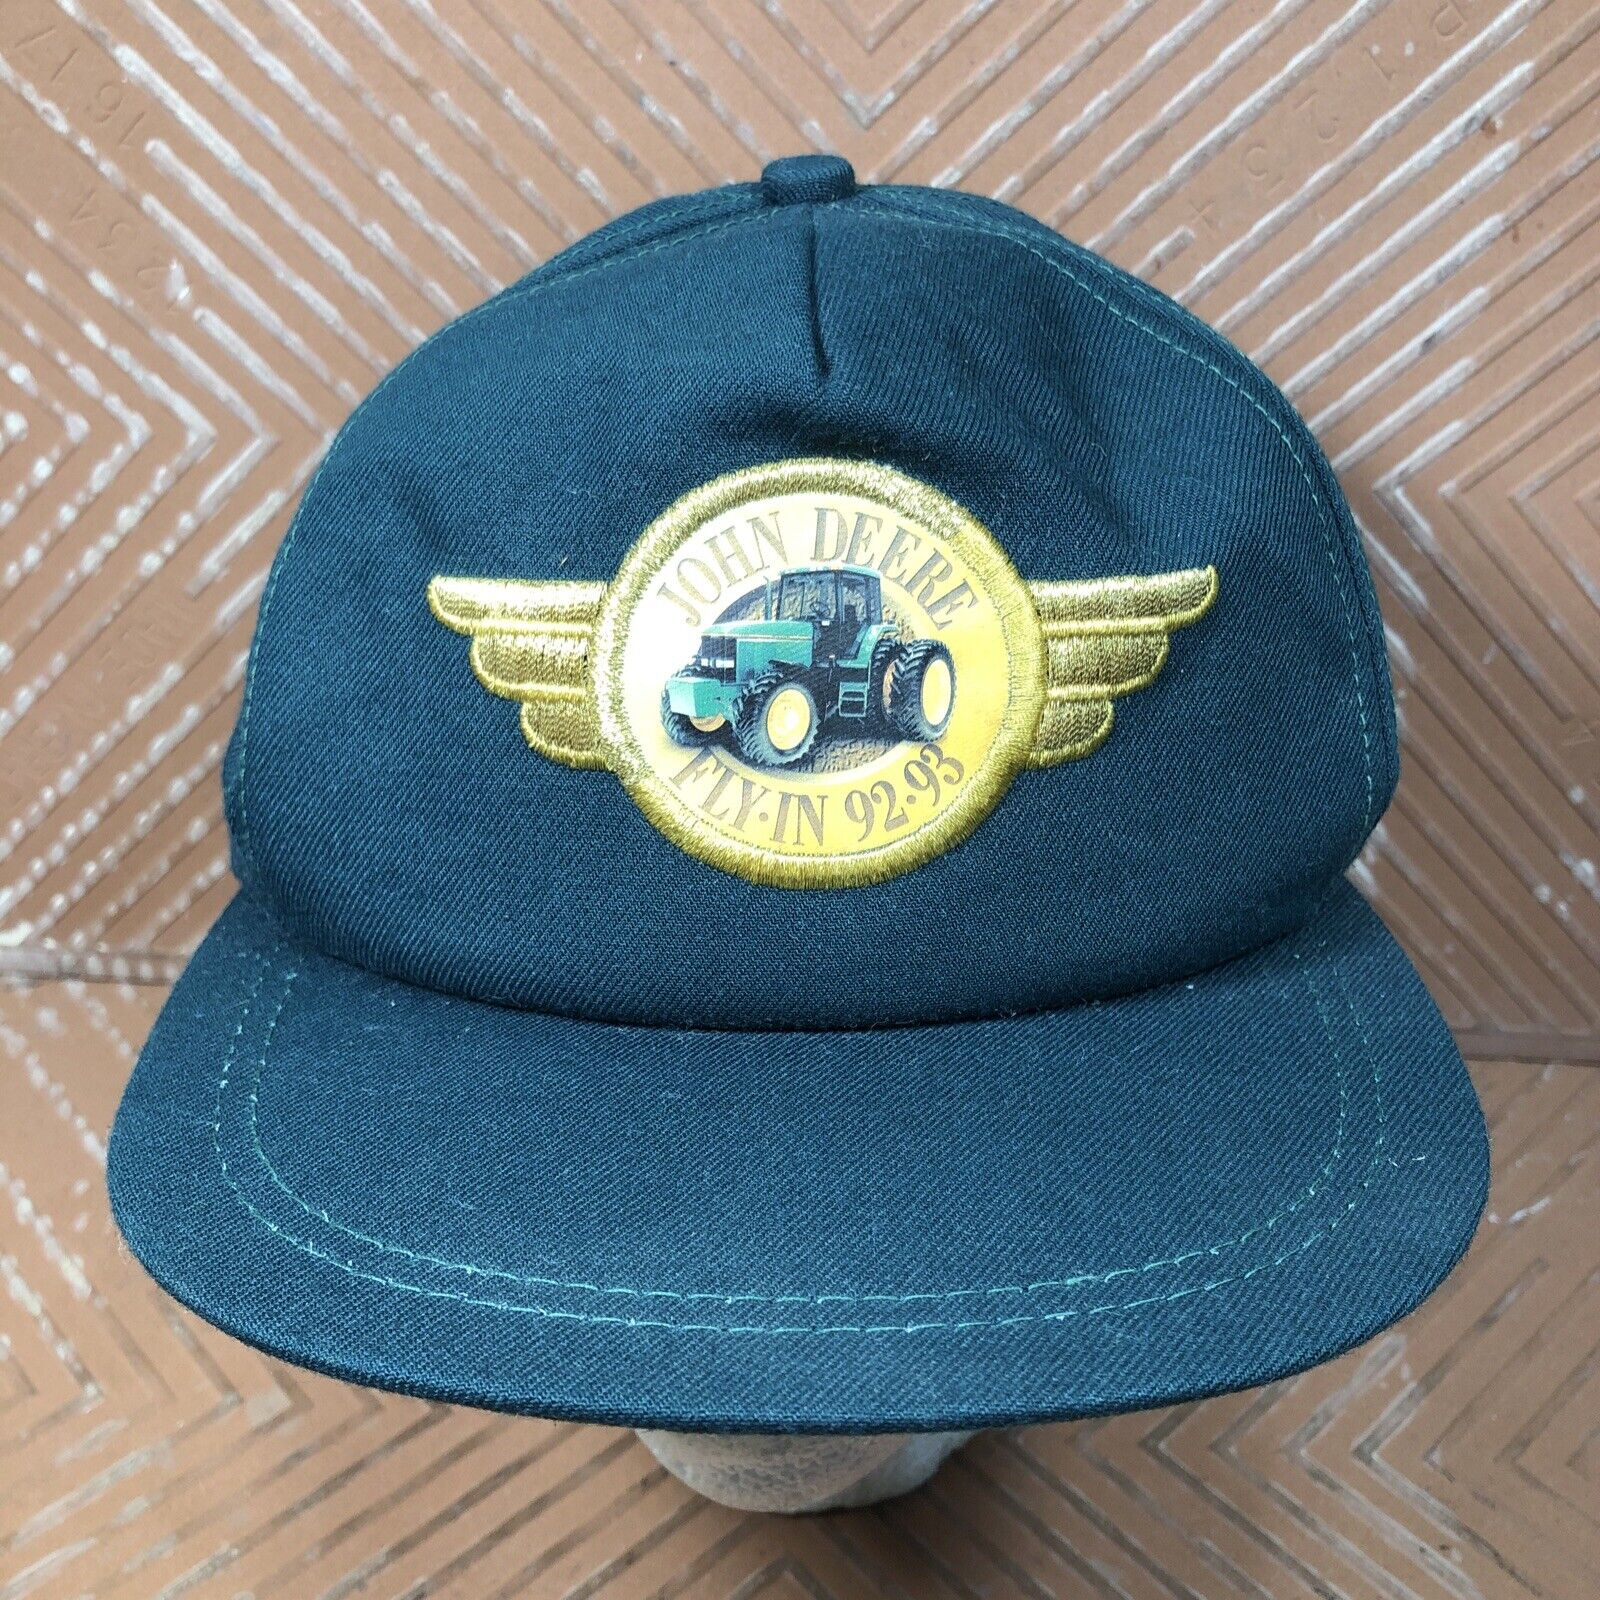 Vintage JOHN DEERE FLY IN 92 93 Farmer Hat Cap K PRODUCTS Leather Strap USA Made